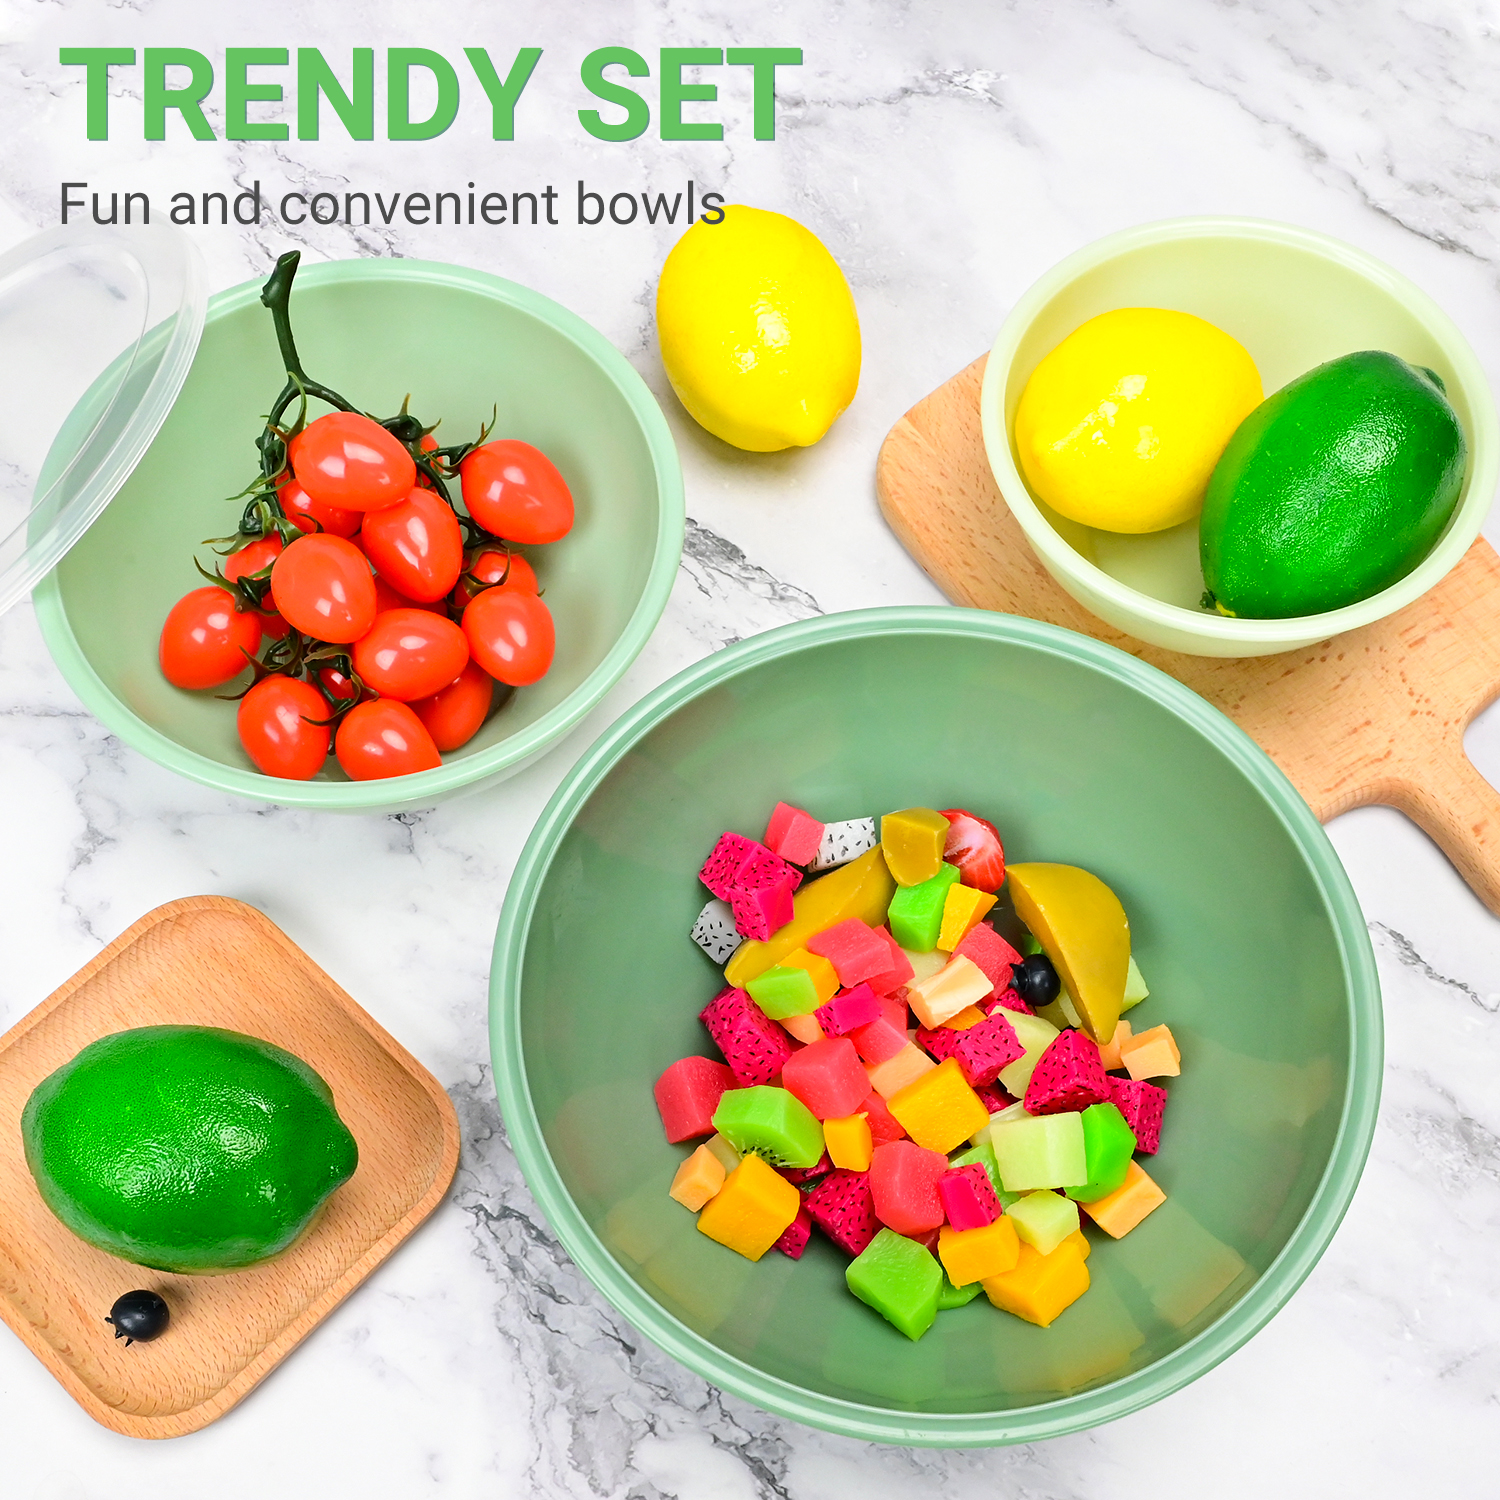 TINANA Plastic Mixing Bowls with Lids Set - 12 Piece Colorful Mixing Bowl Set for Kitchen - Nesting Bowls with Lids Set, 6 Prep Bowls and 6 Lids - Microwave and Freezer Safe (Green Ombre) - image 5 of 7